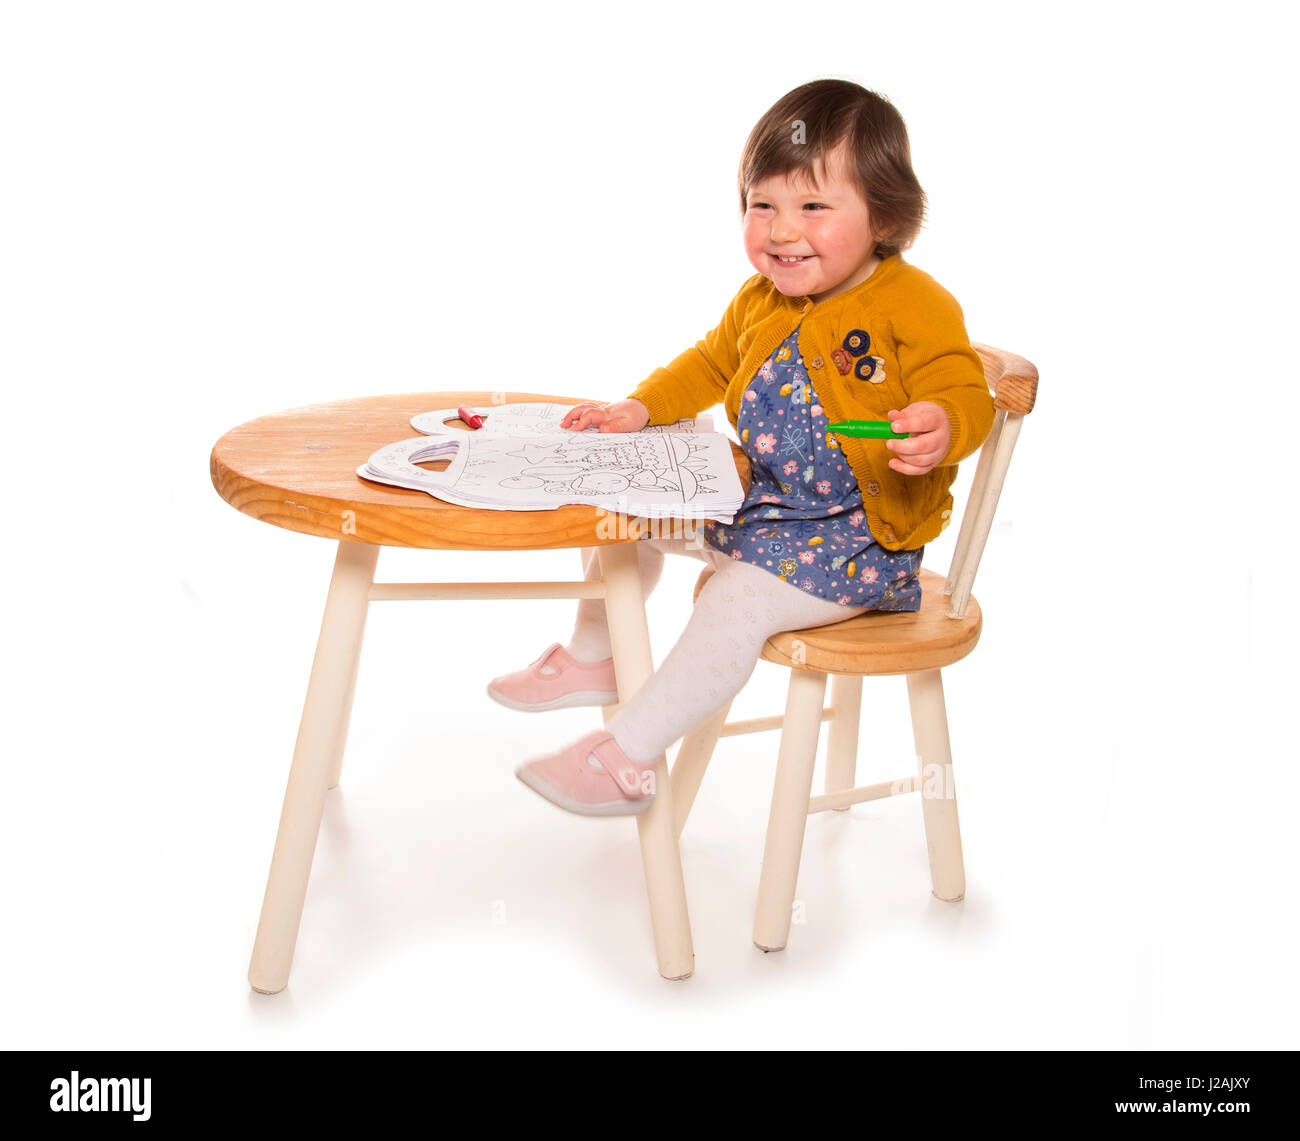 toddler at table colouring with crayon Stock Photo